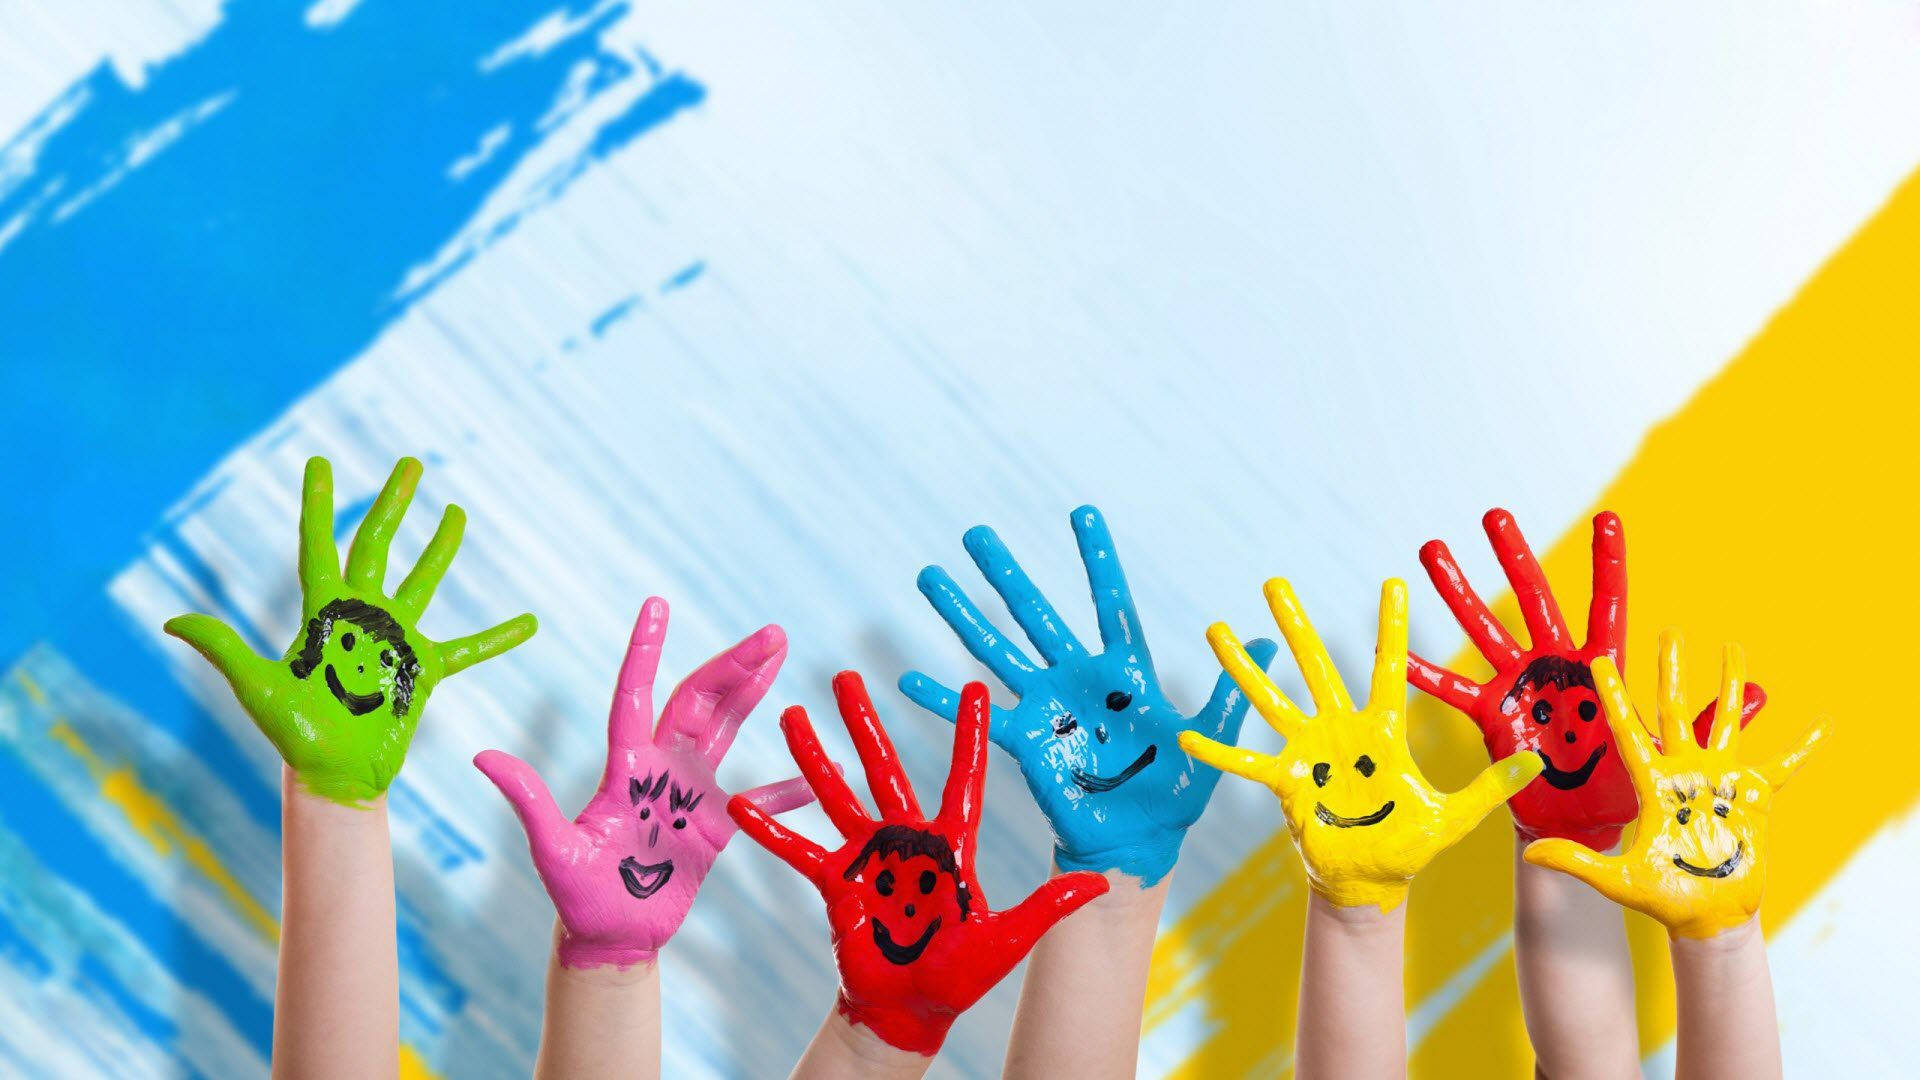 Painted Children's Hands With Happy Faces Background